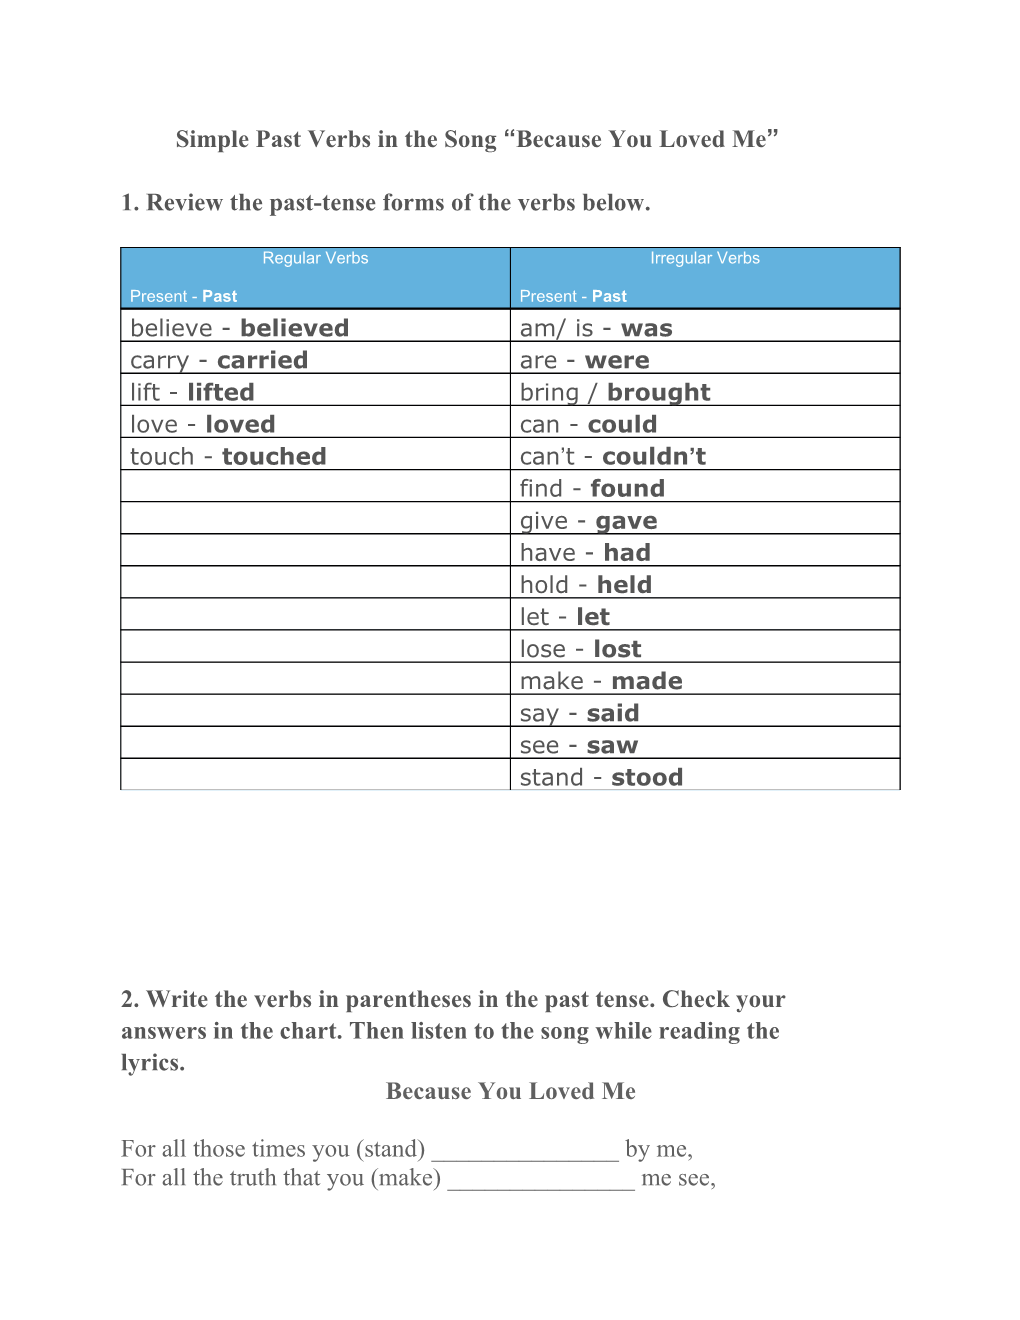 1. Review the Past-Tense Forms of the Verbs Below